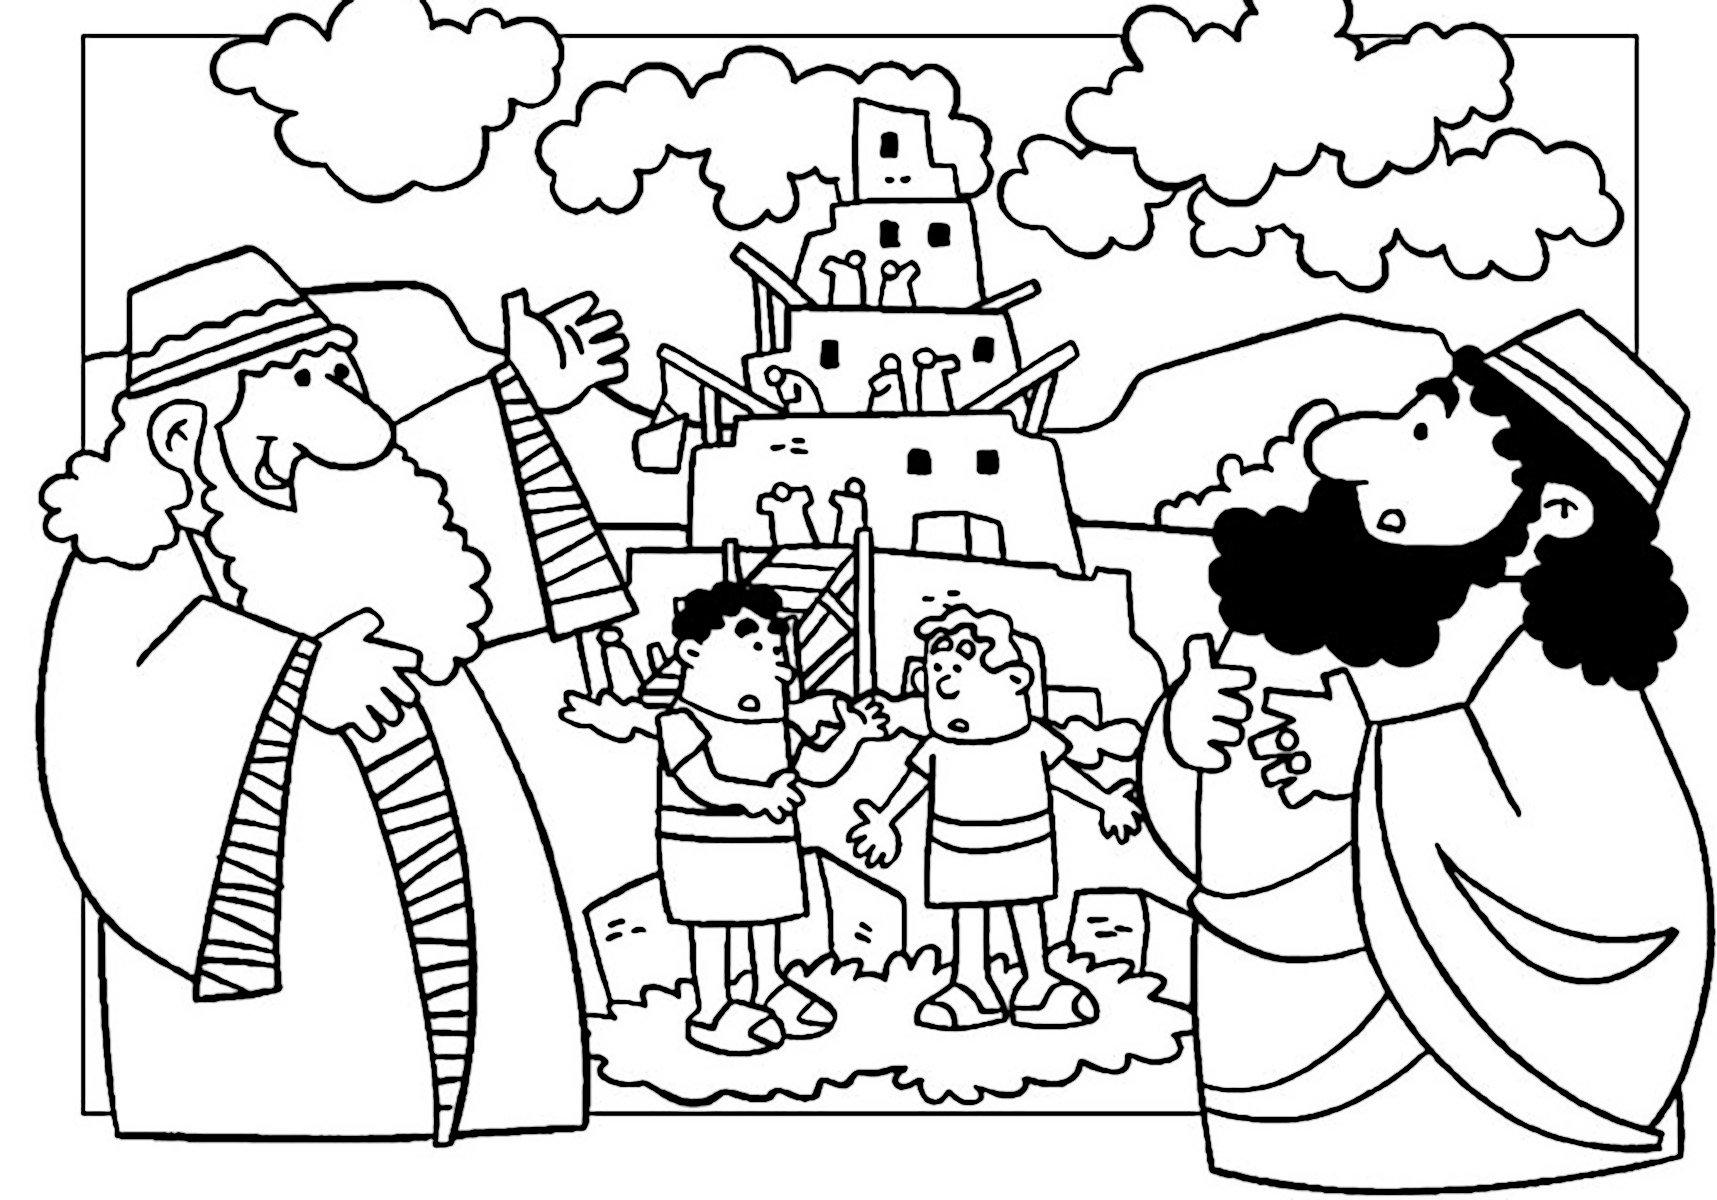 Tower of Babel for kids #13